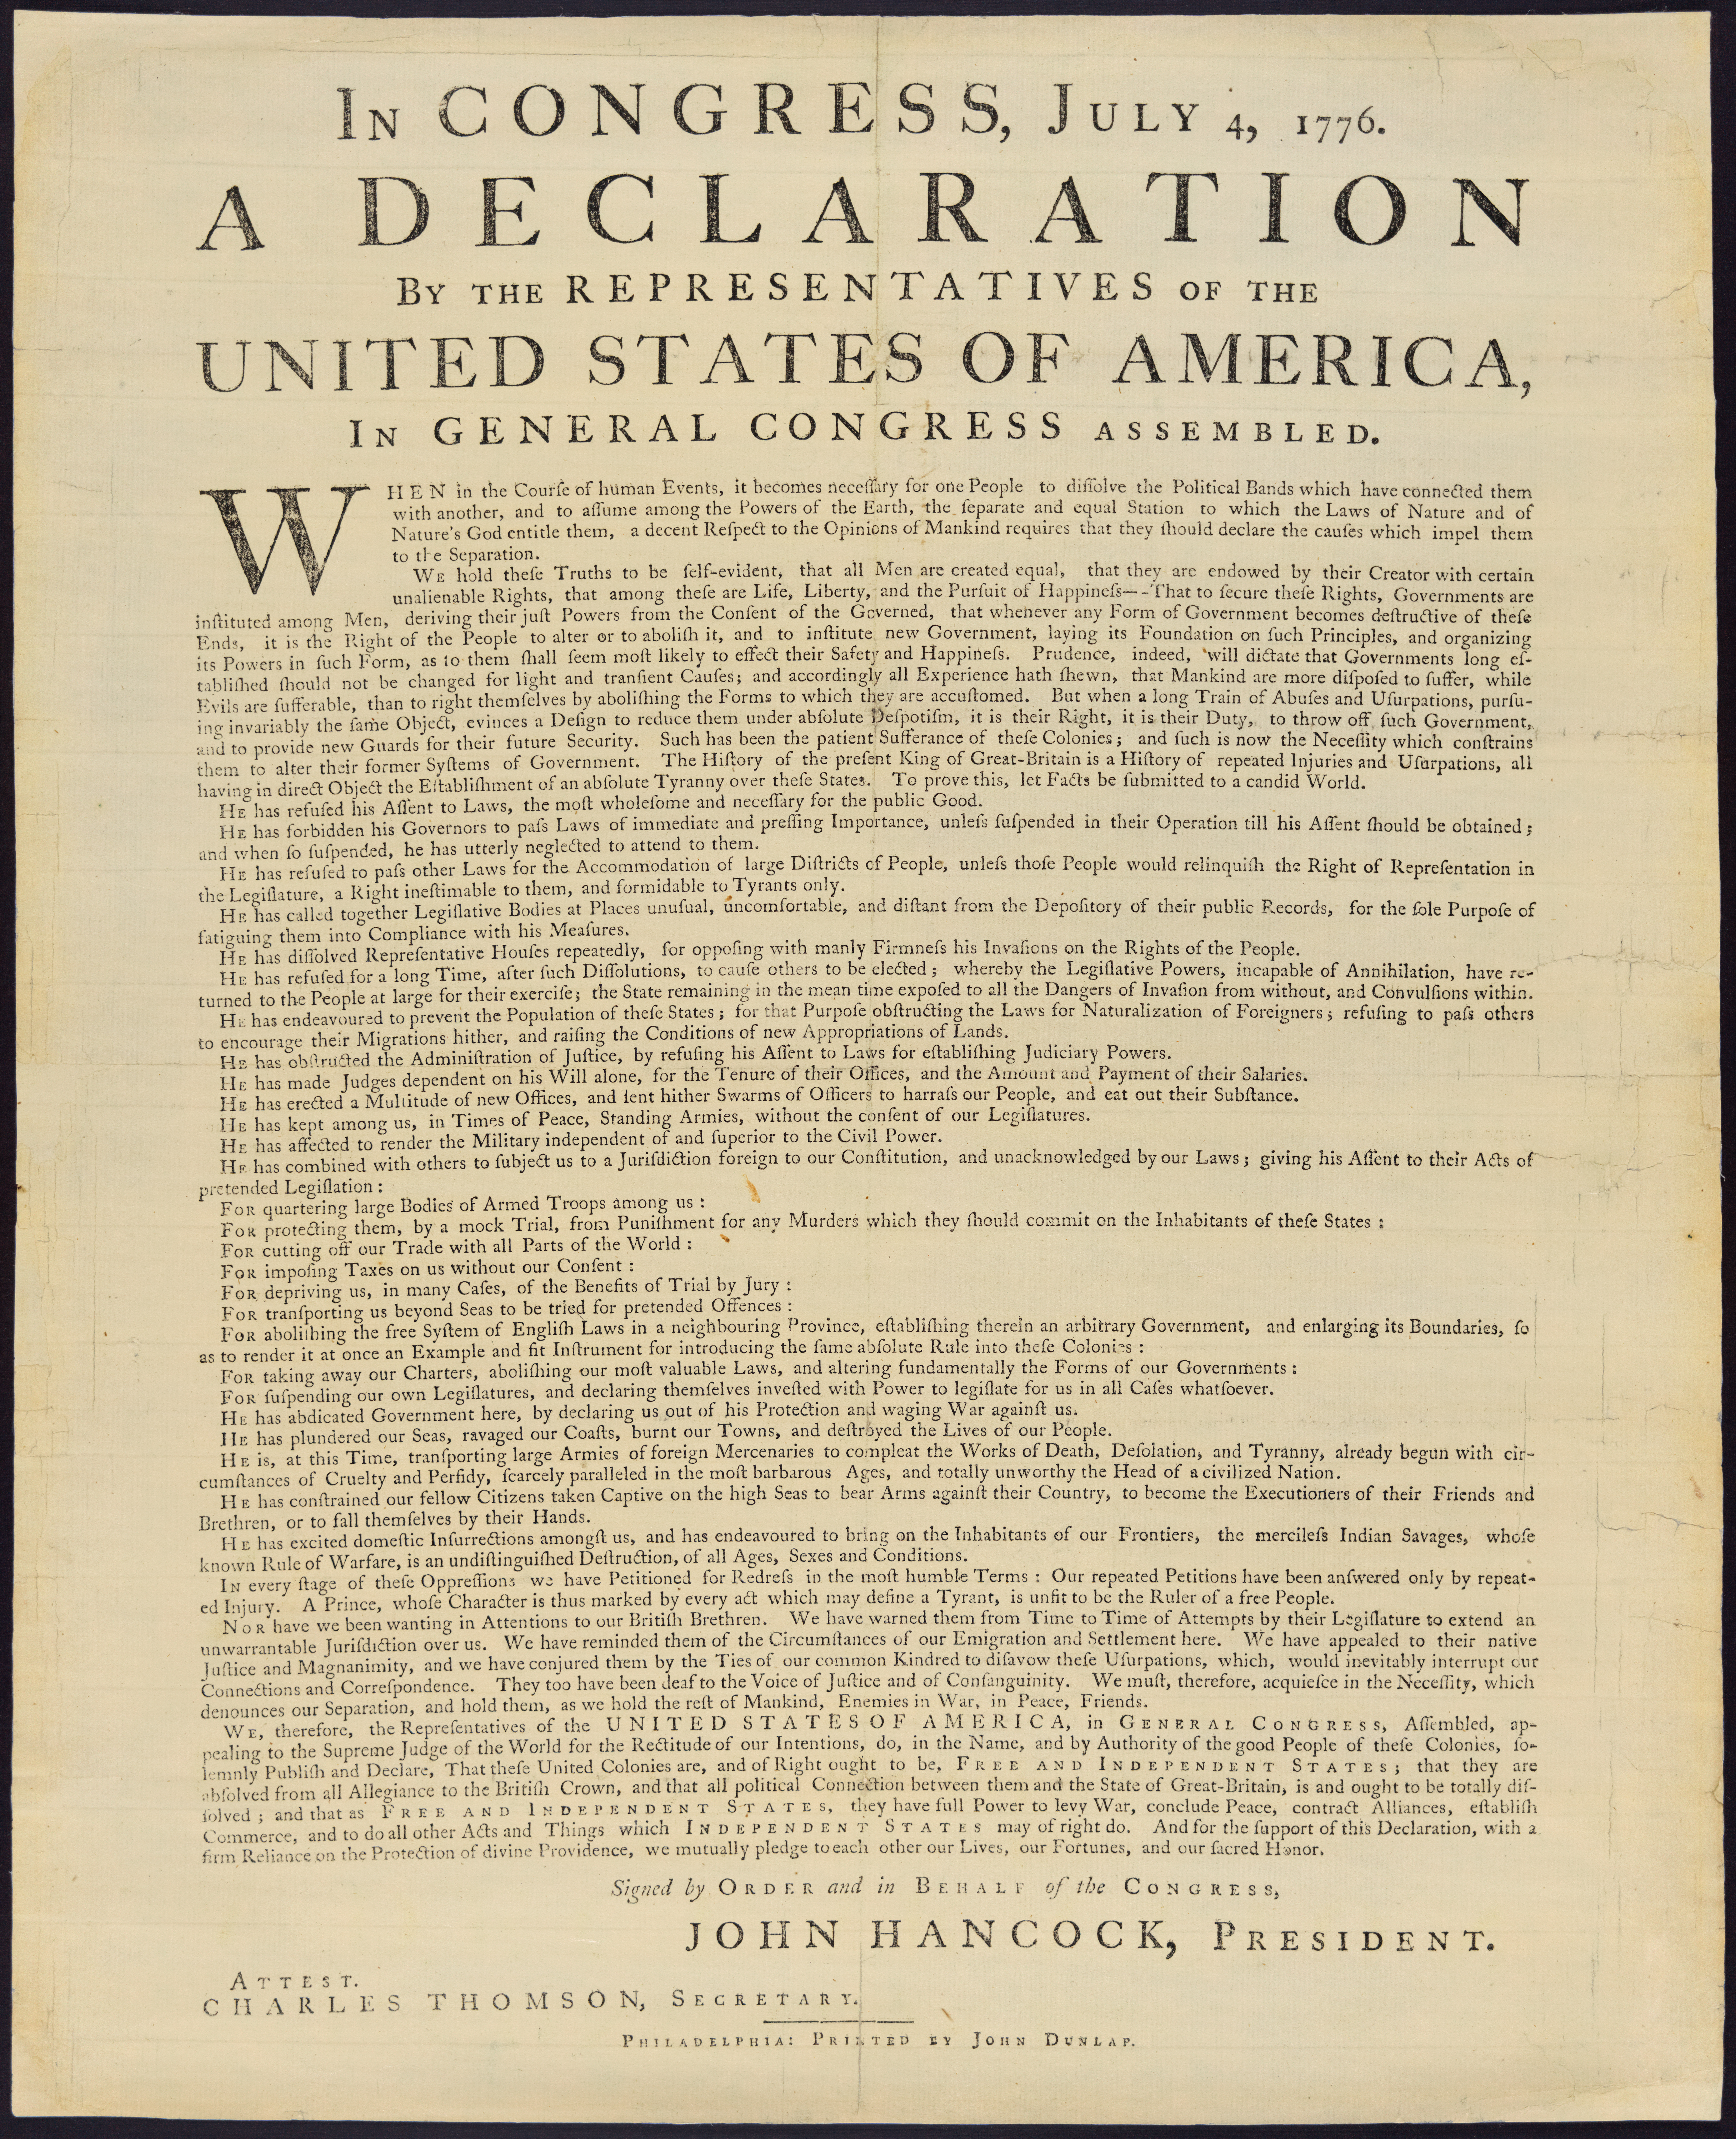 The Dunlap Broadsides of the Declaration of Independence: Lost Treasures